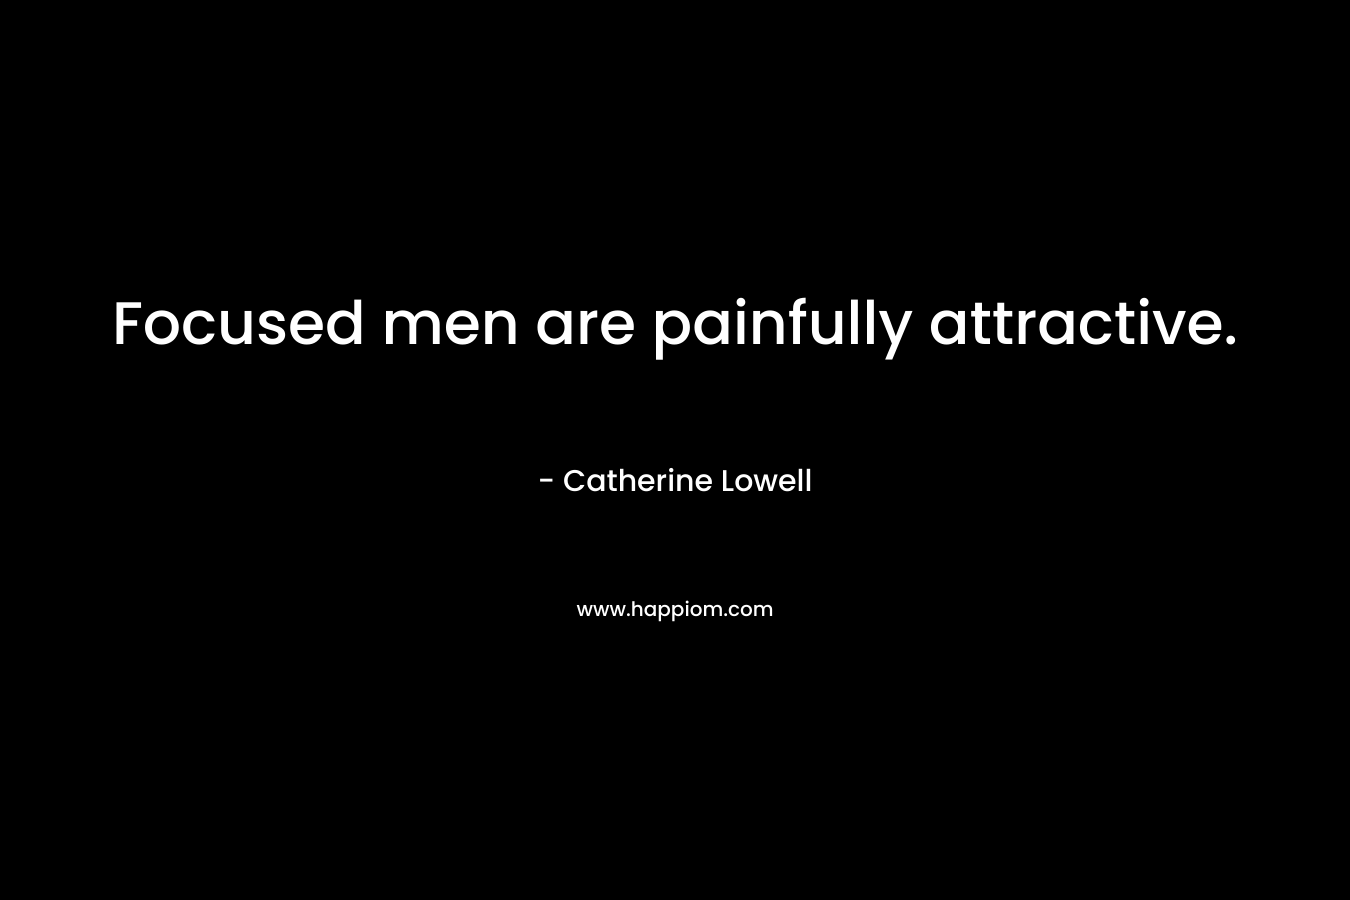 Focused men are painfully attractive.